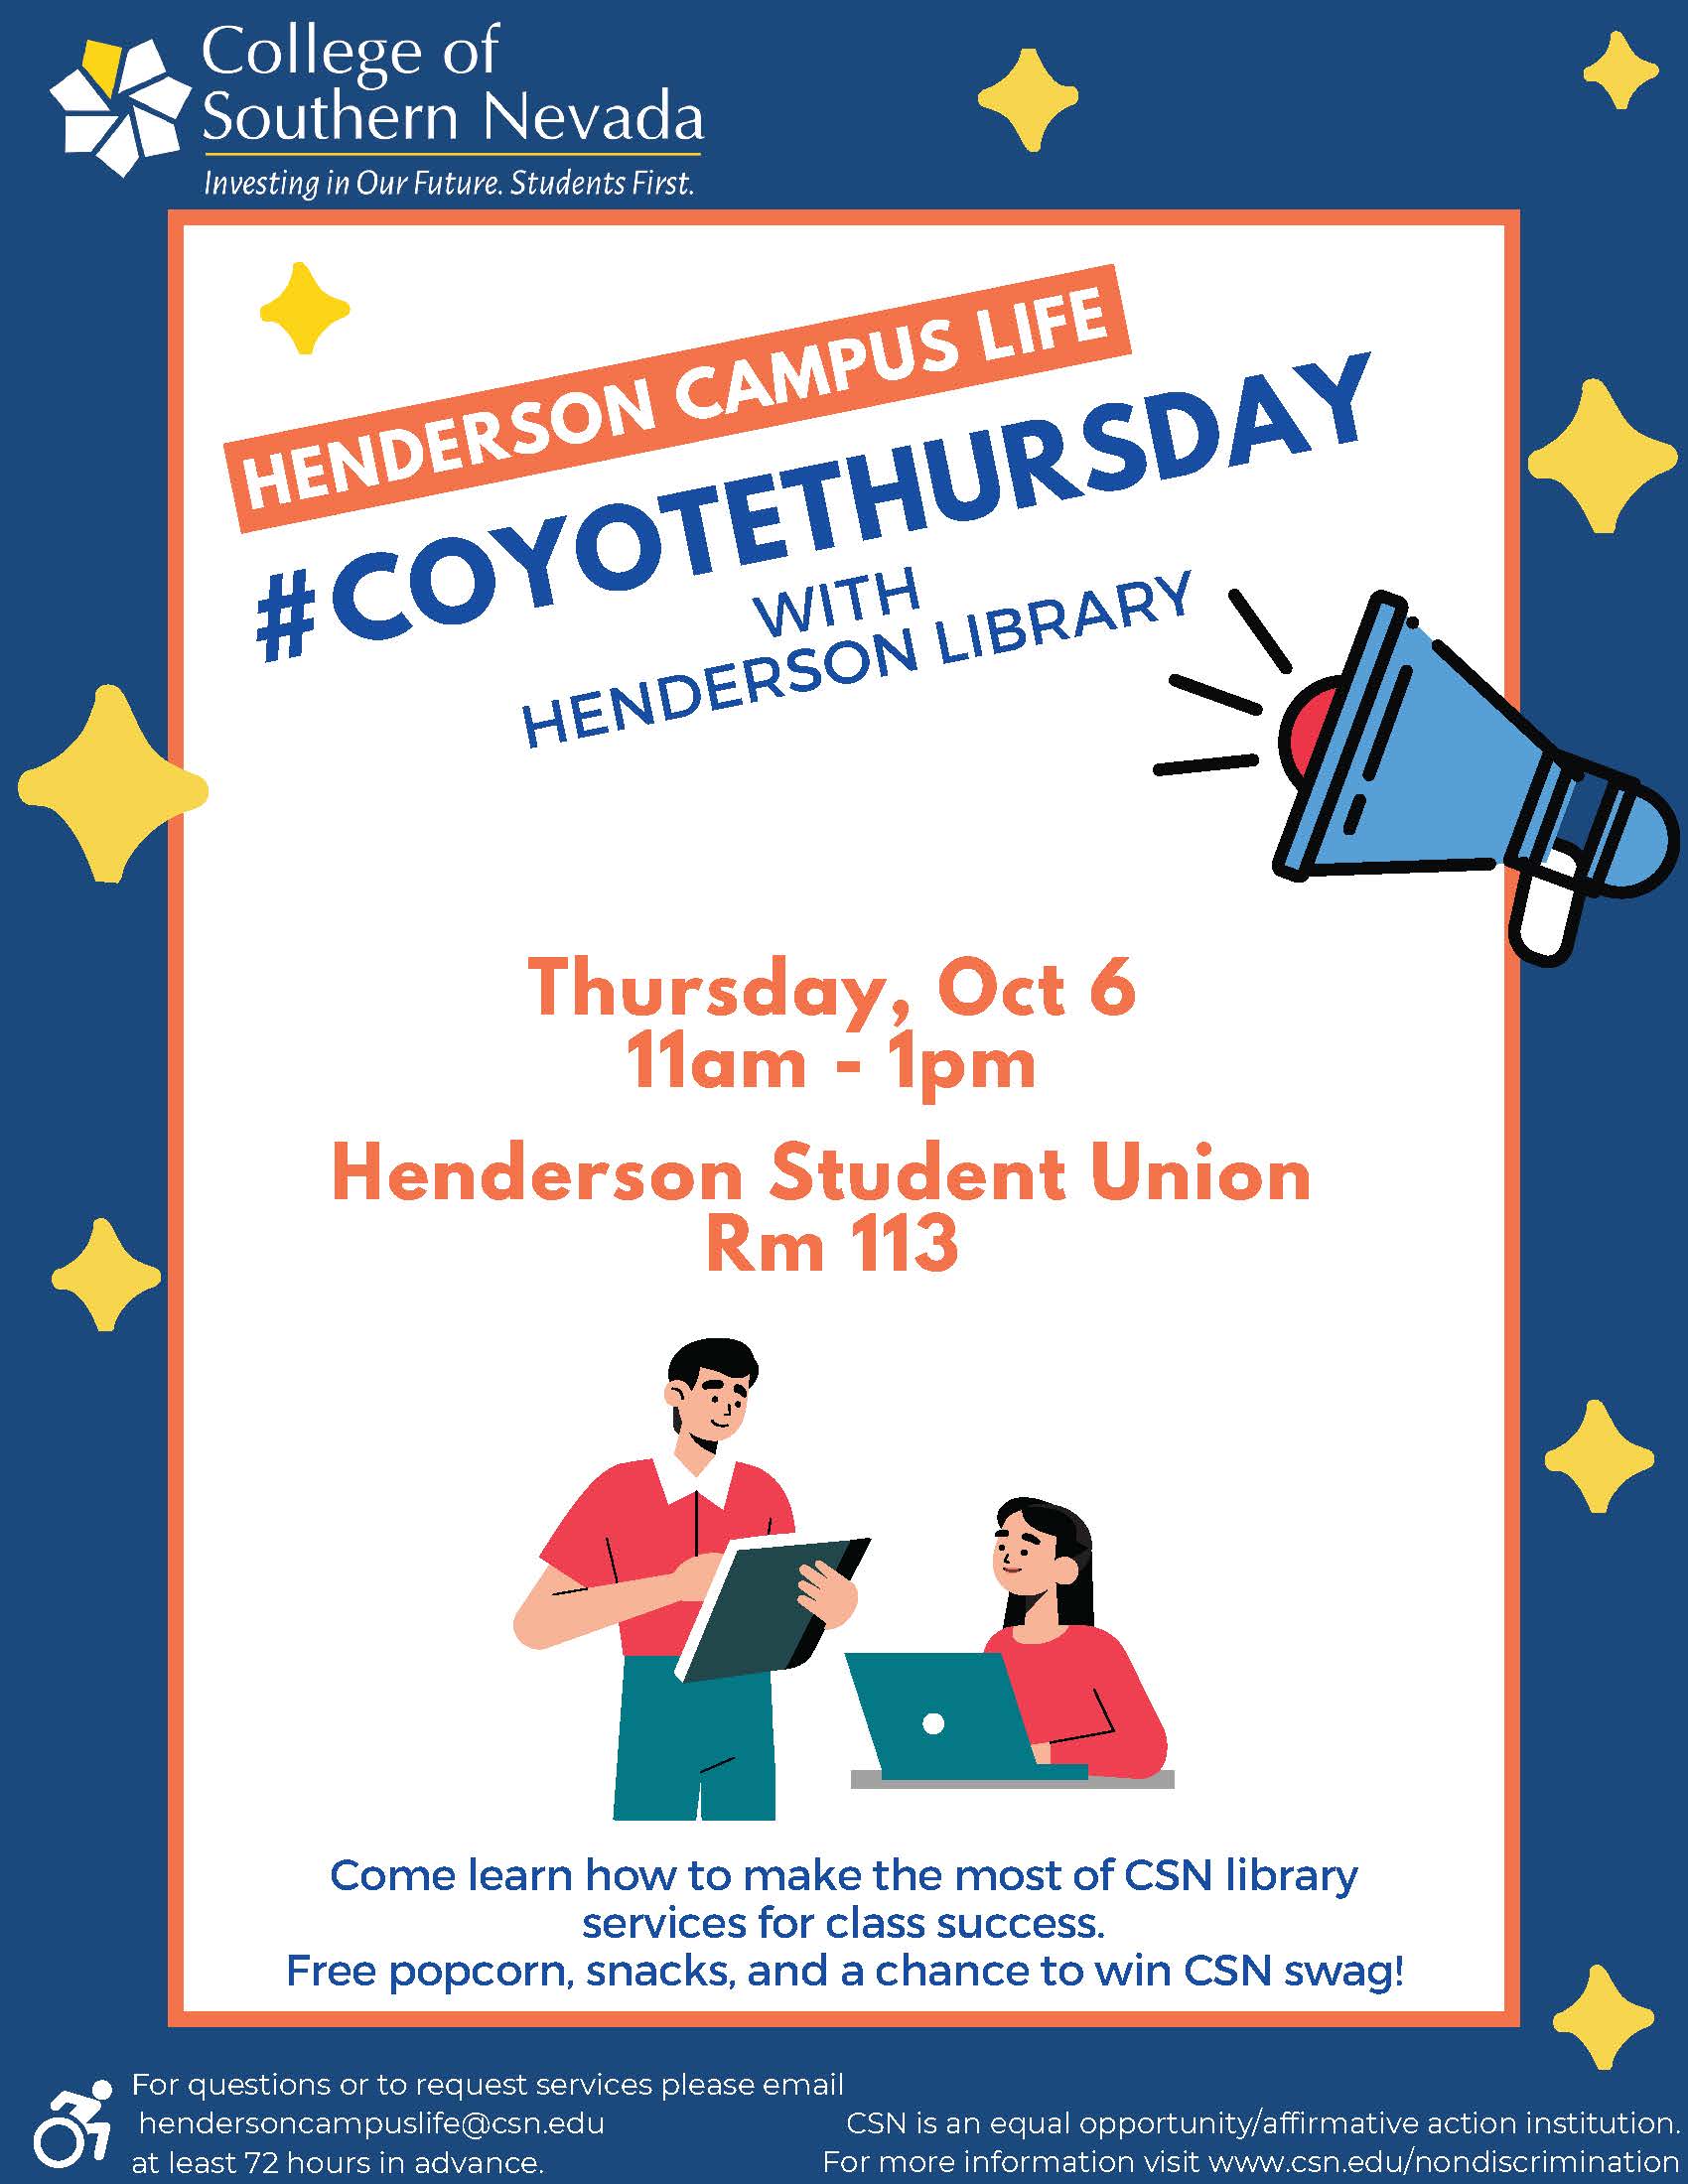 Come learn how to make the most of CSN Library services 